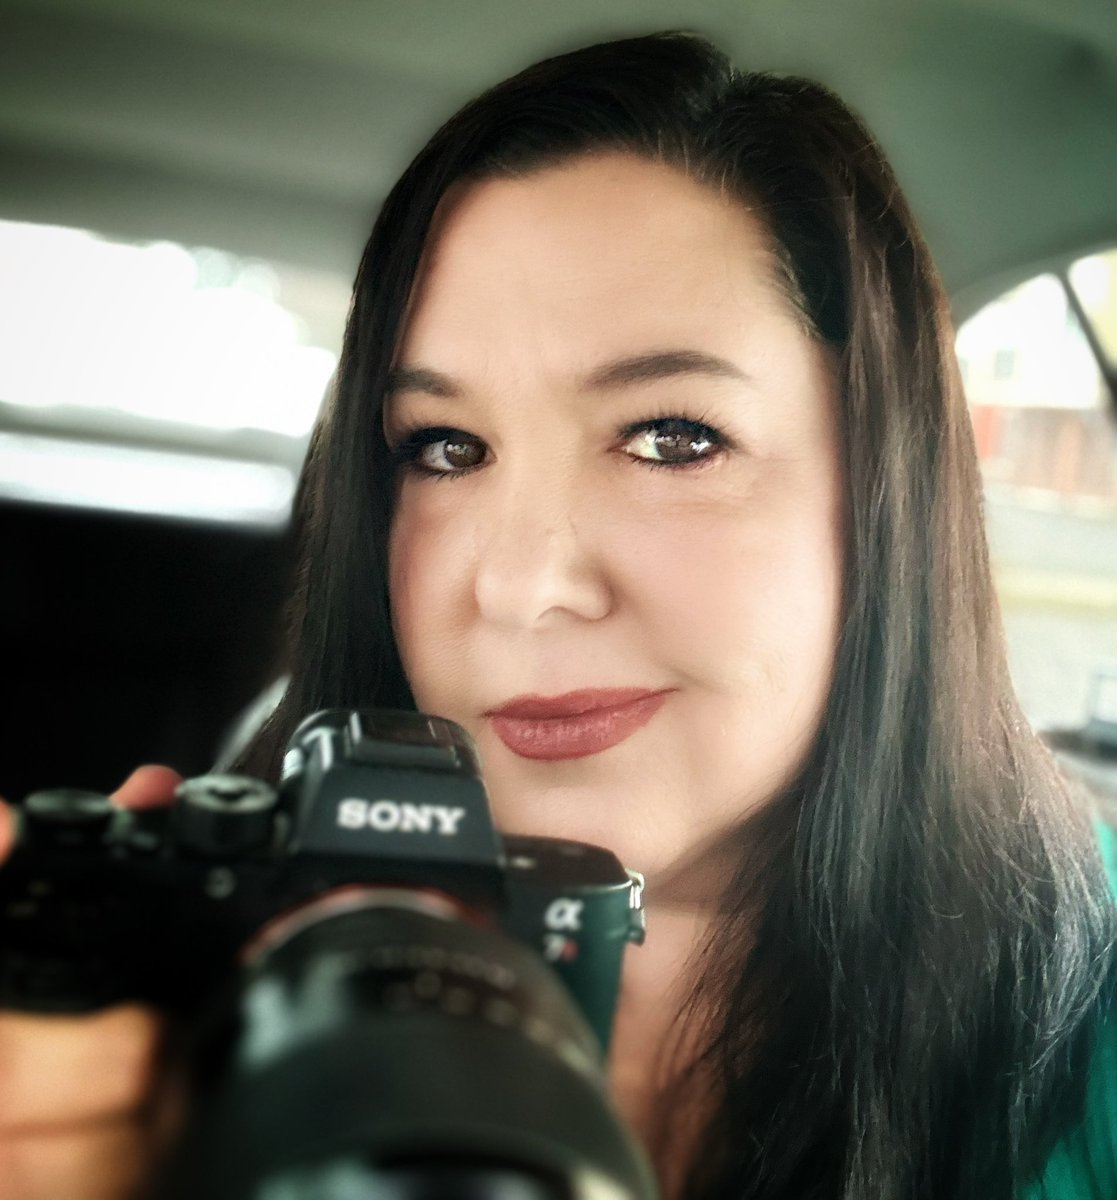 I’m Chelly. I’m a photographer and photojournalist. Won some pretty cool awards for my photography. I’m also a horse girl and went to graduate school. I’ve traveled all over the world. But the best thing I’ve ever done, hands down, is being a mother to my kiddos.